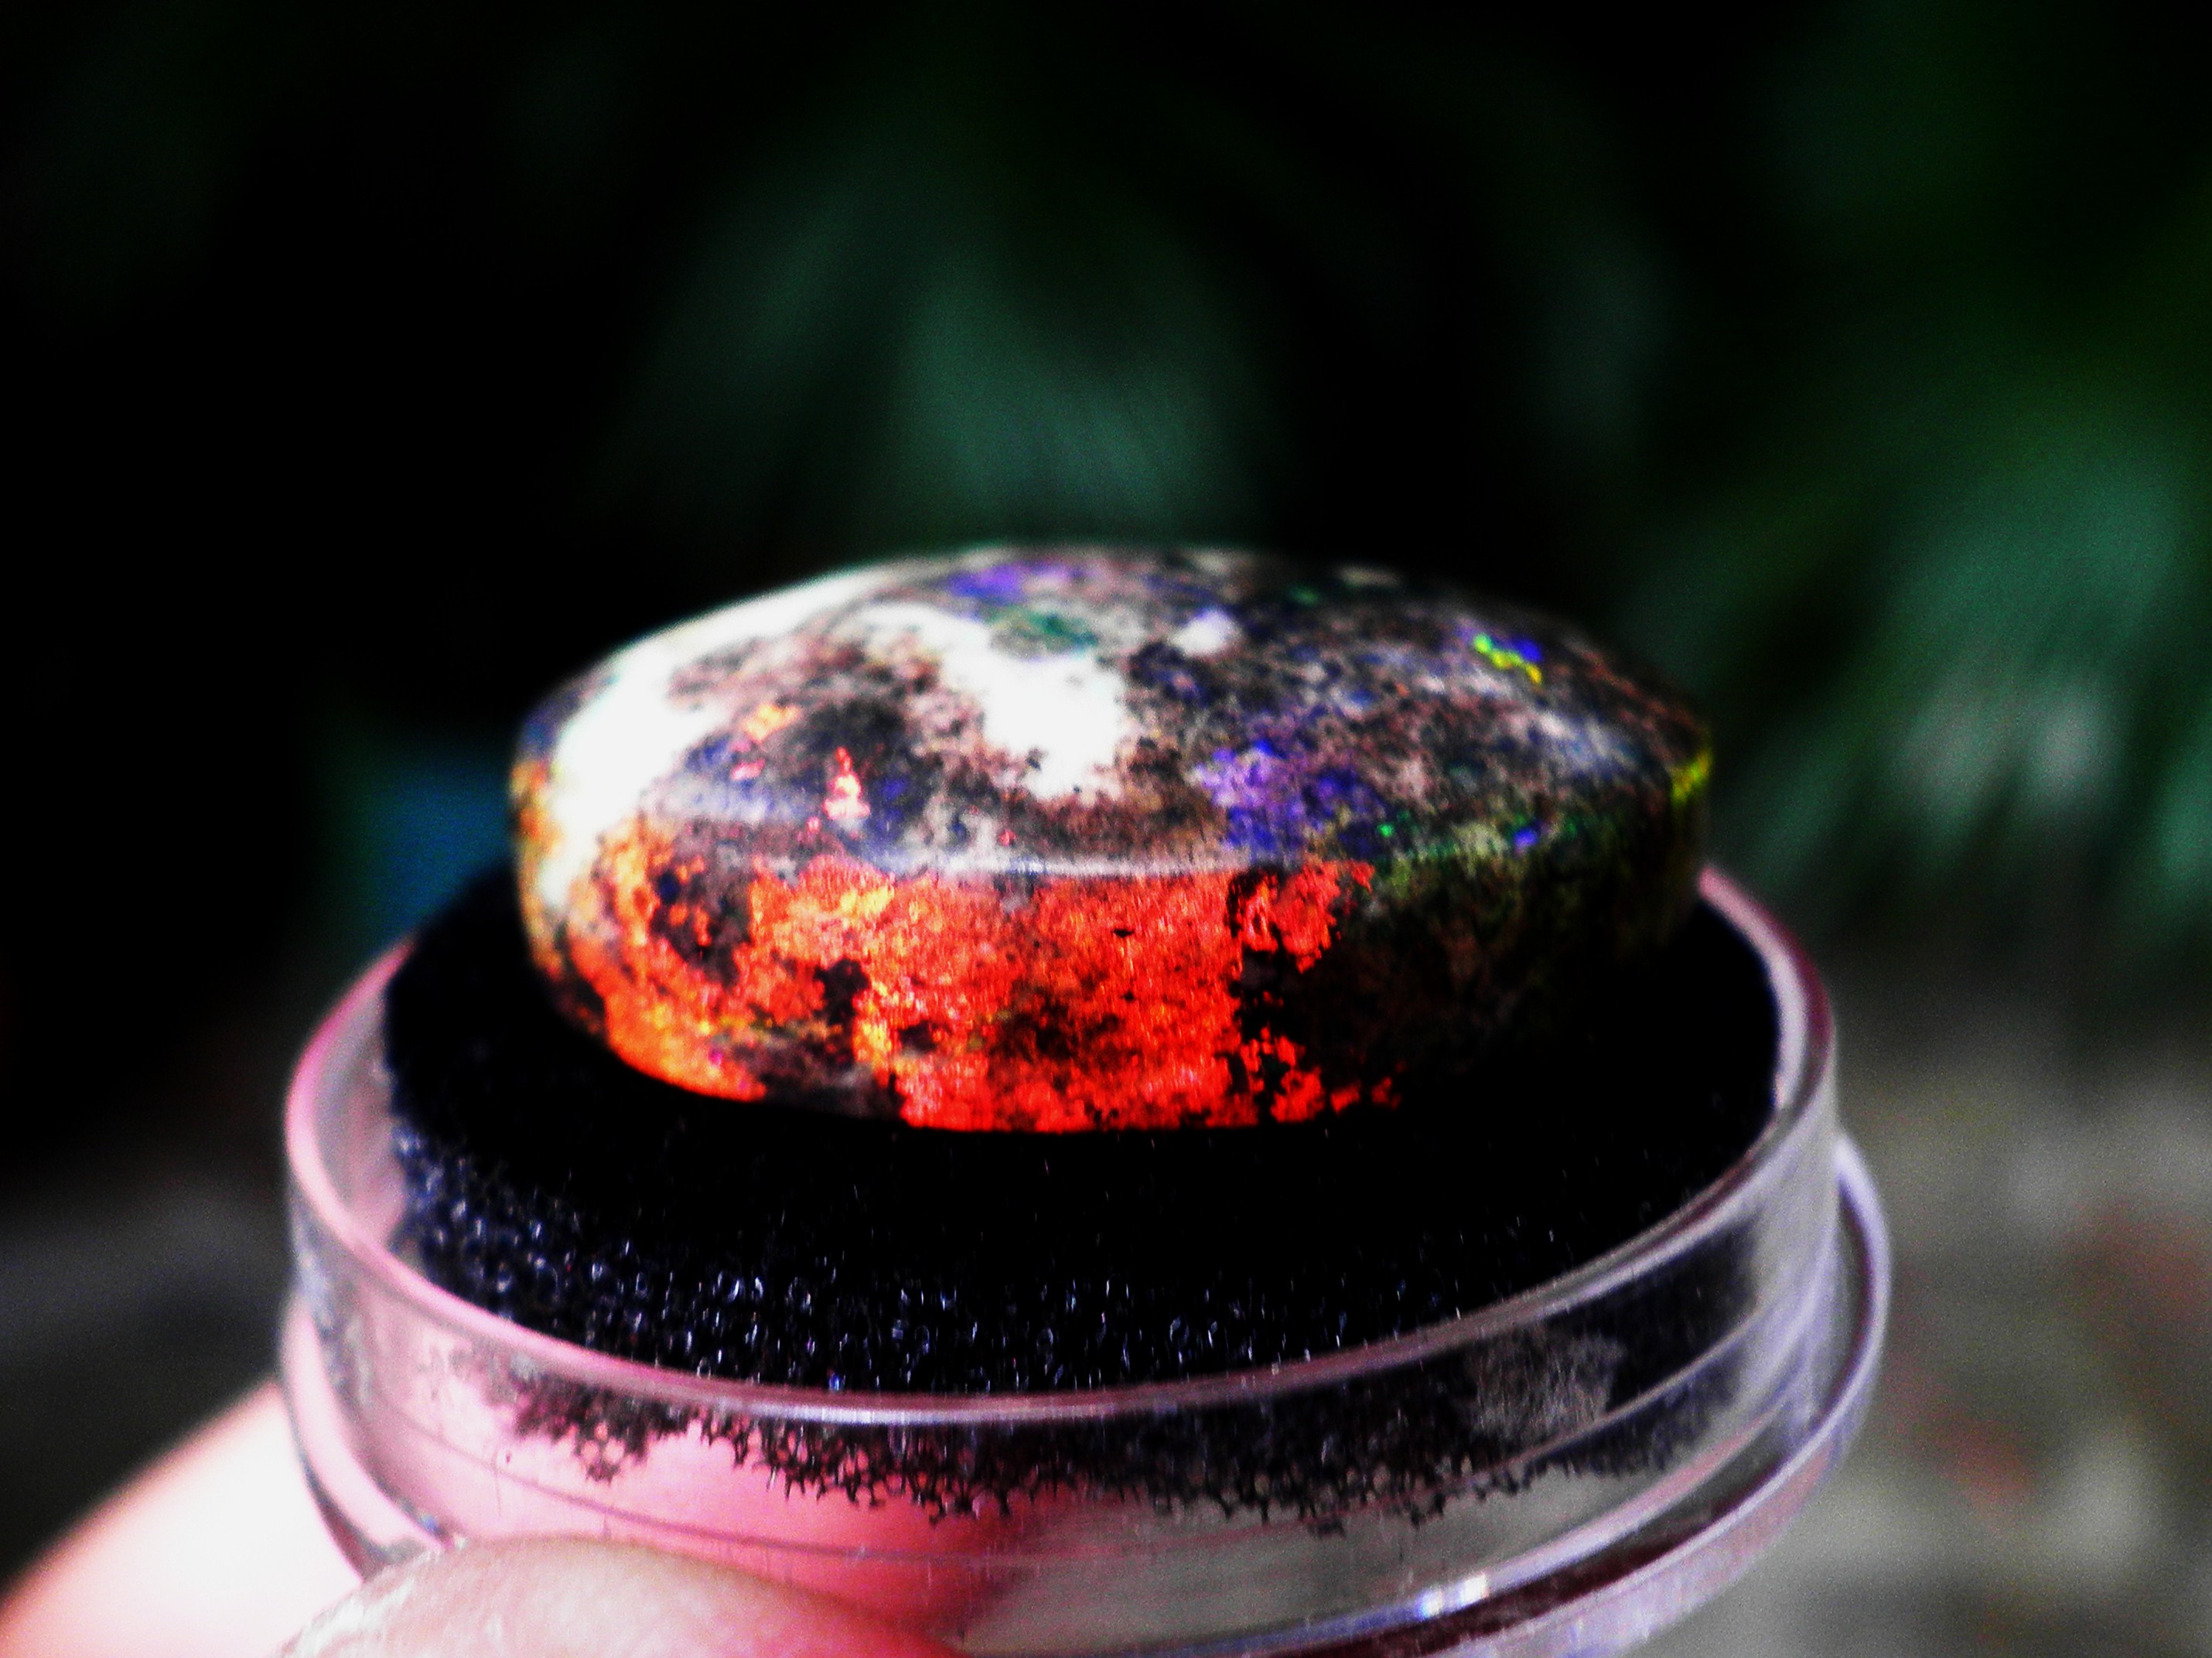 Second View of Andamooka Matrix Opal showing red and purple colours